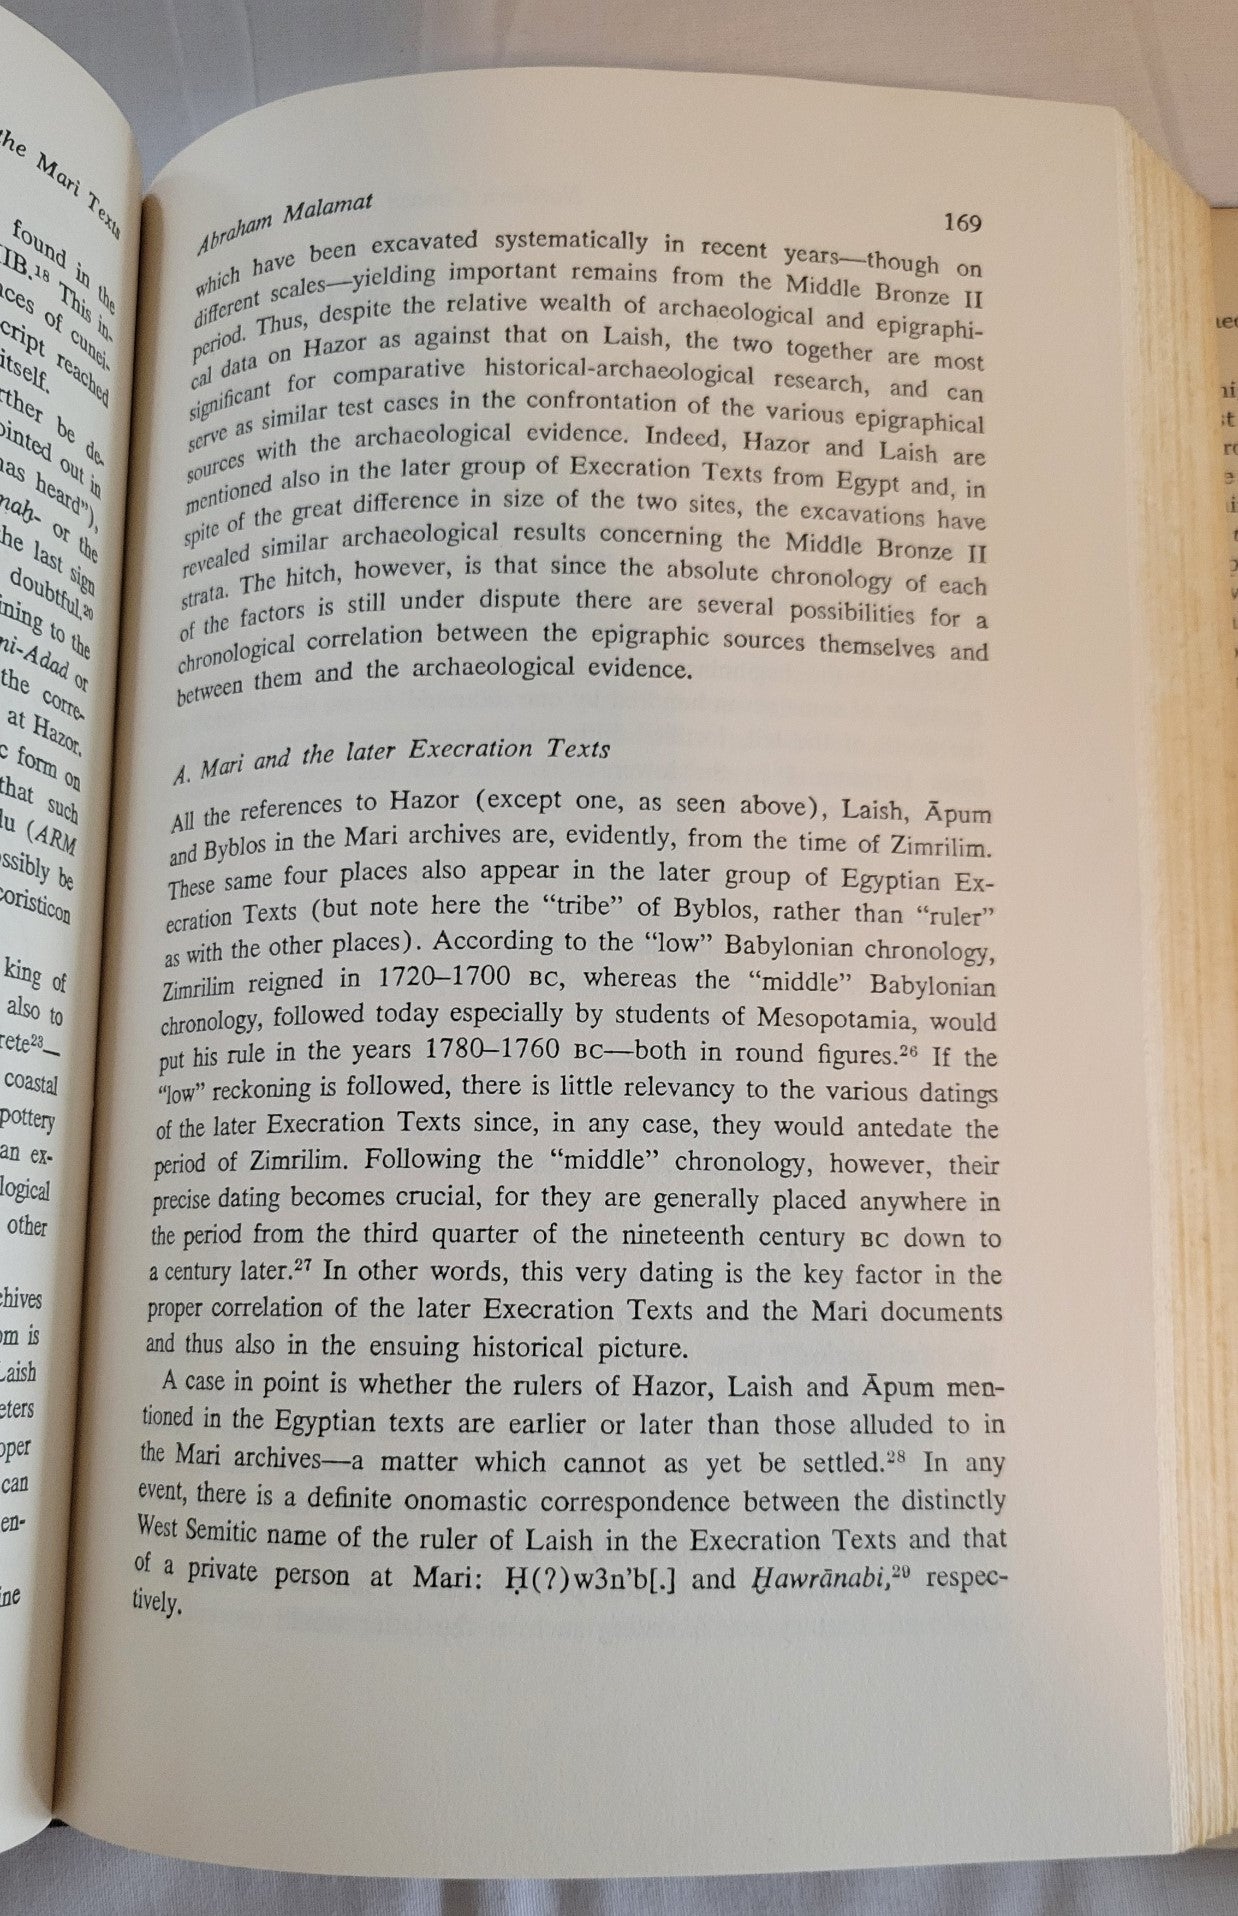 Used book for sale, “Near Eastern Archaeology in the Twentieth Century” edited by James A. Sanders, written in honor of Nelson Glueck. View of page 169